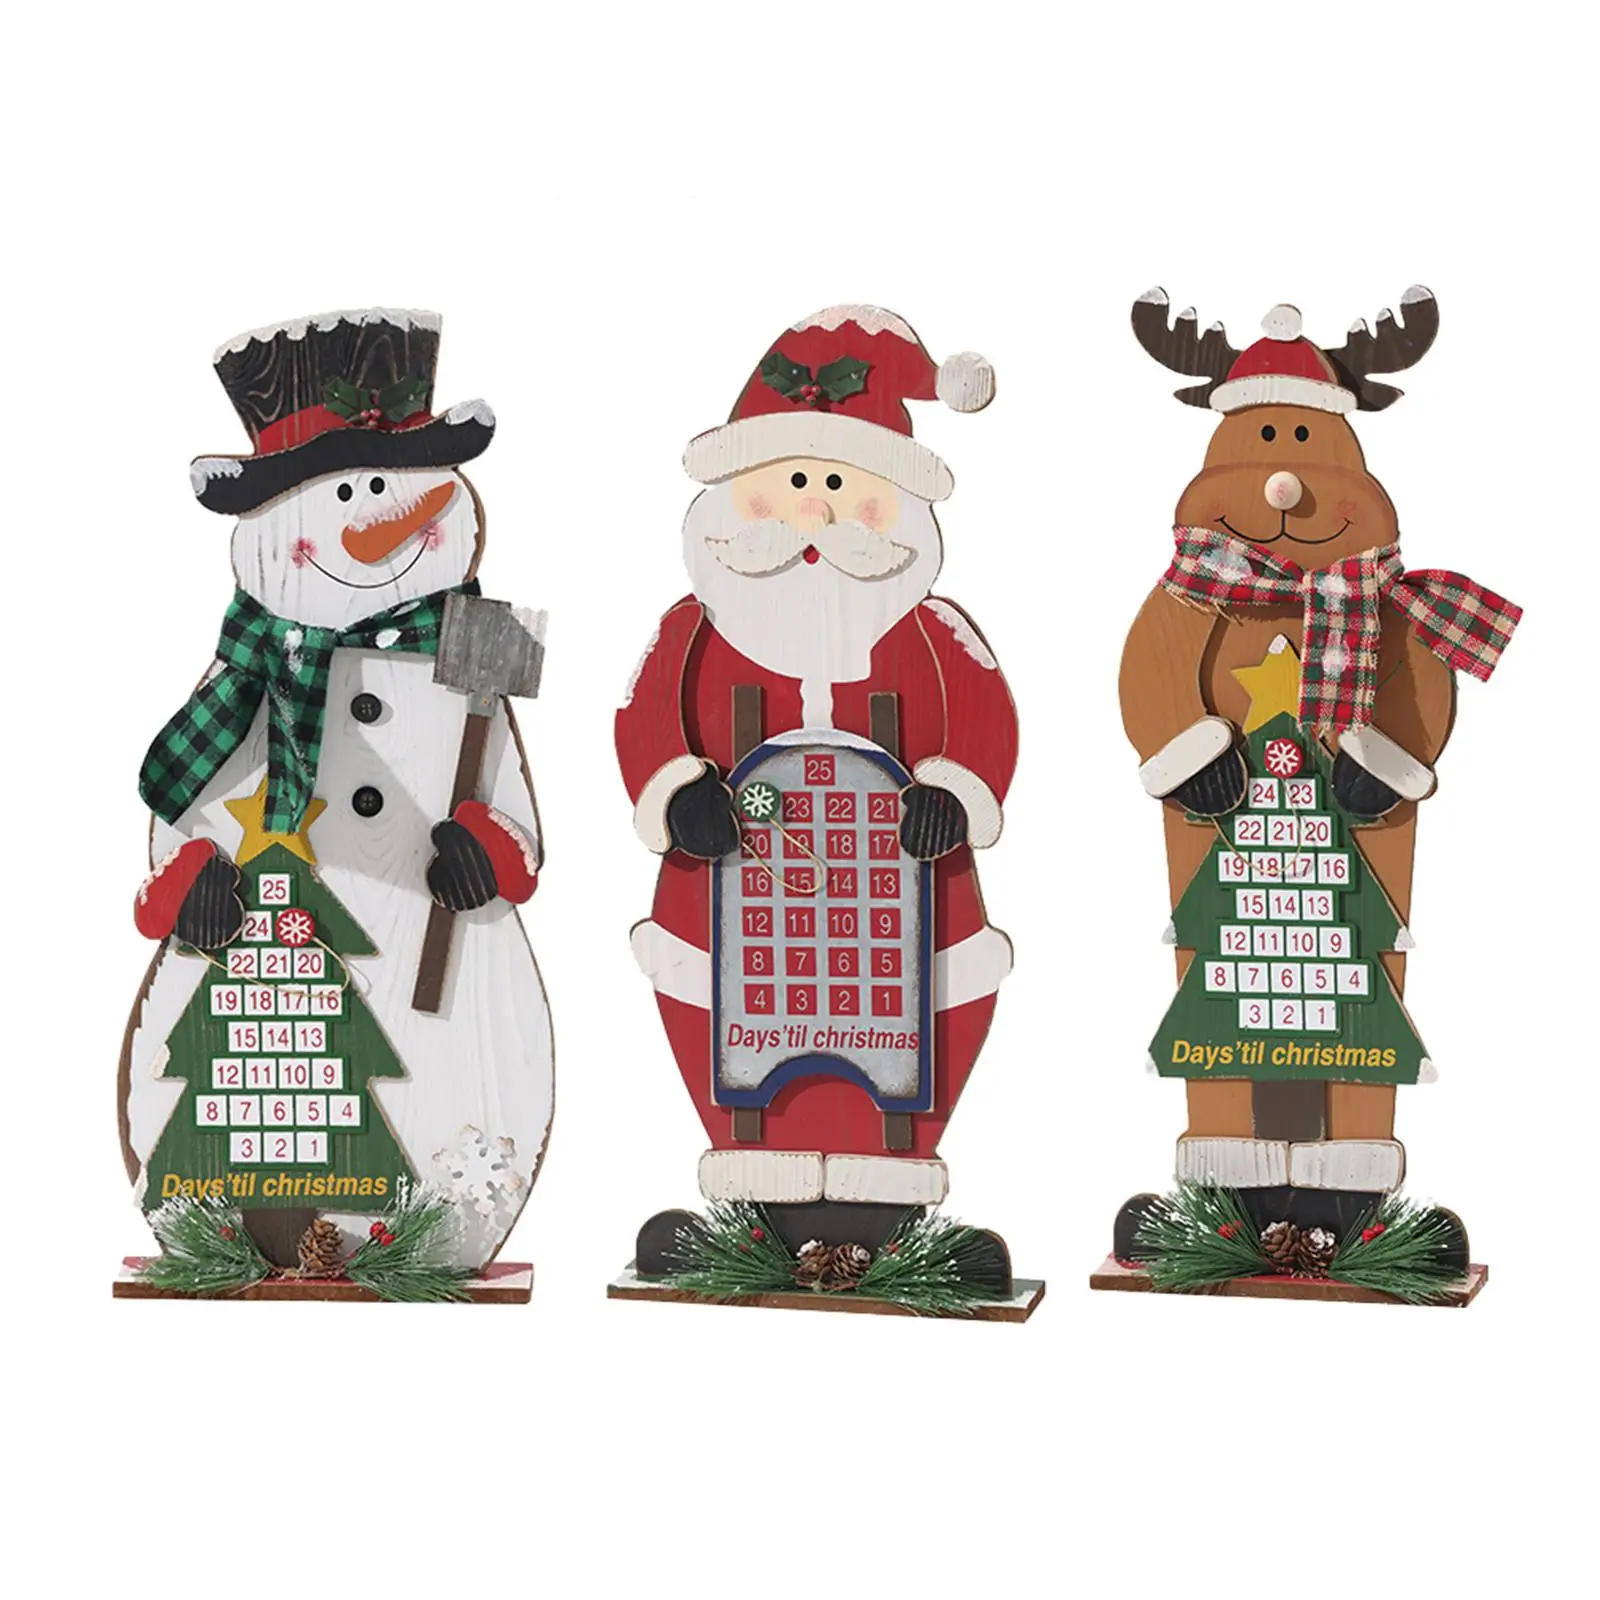 Christmas Wooden Advent Calendar Collectible Home Decor Reusable 25 Days Cute for Office Tabletop Indoor Fireplace Living Room